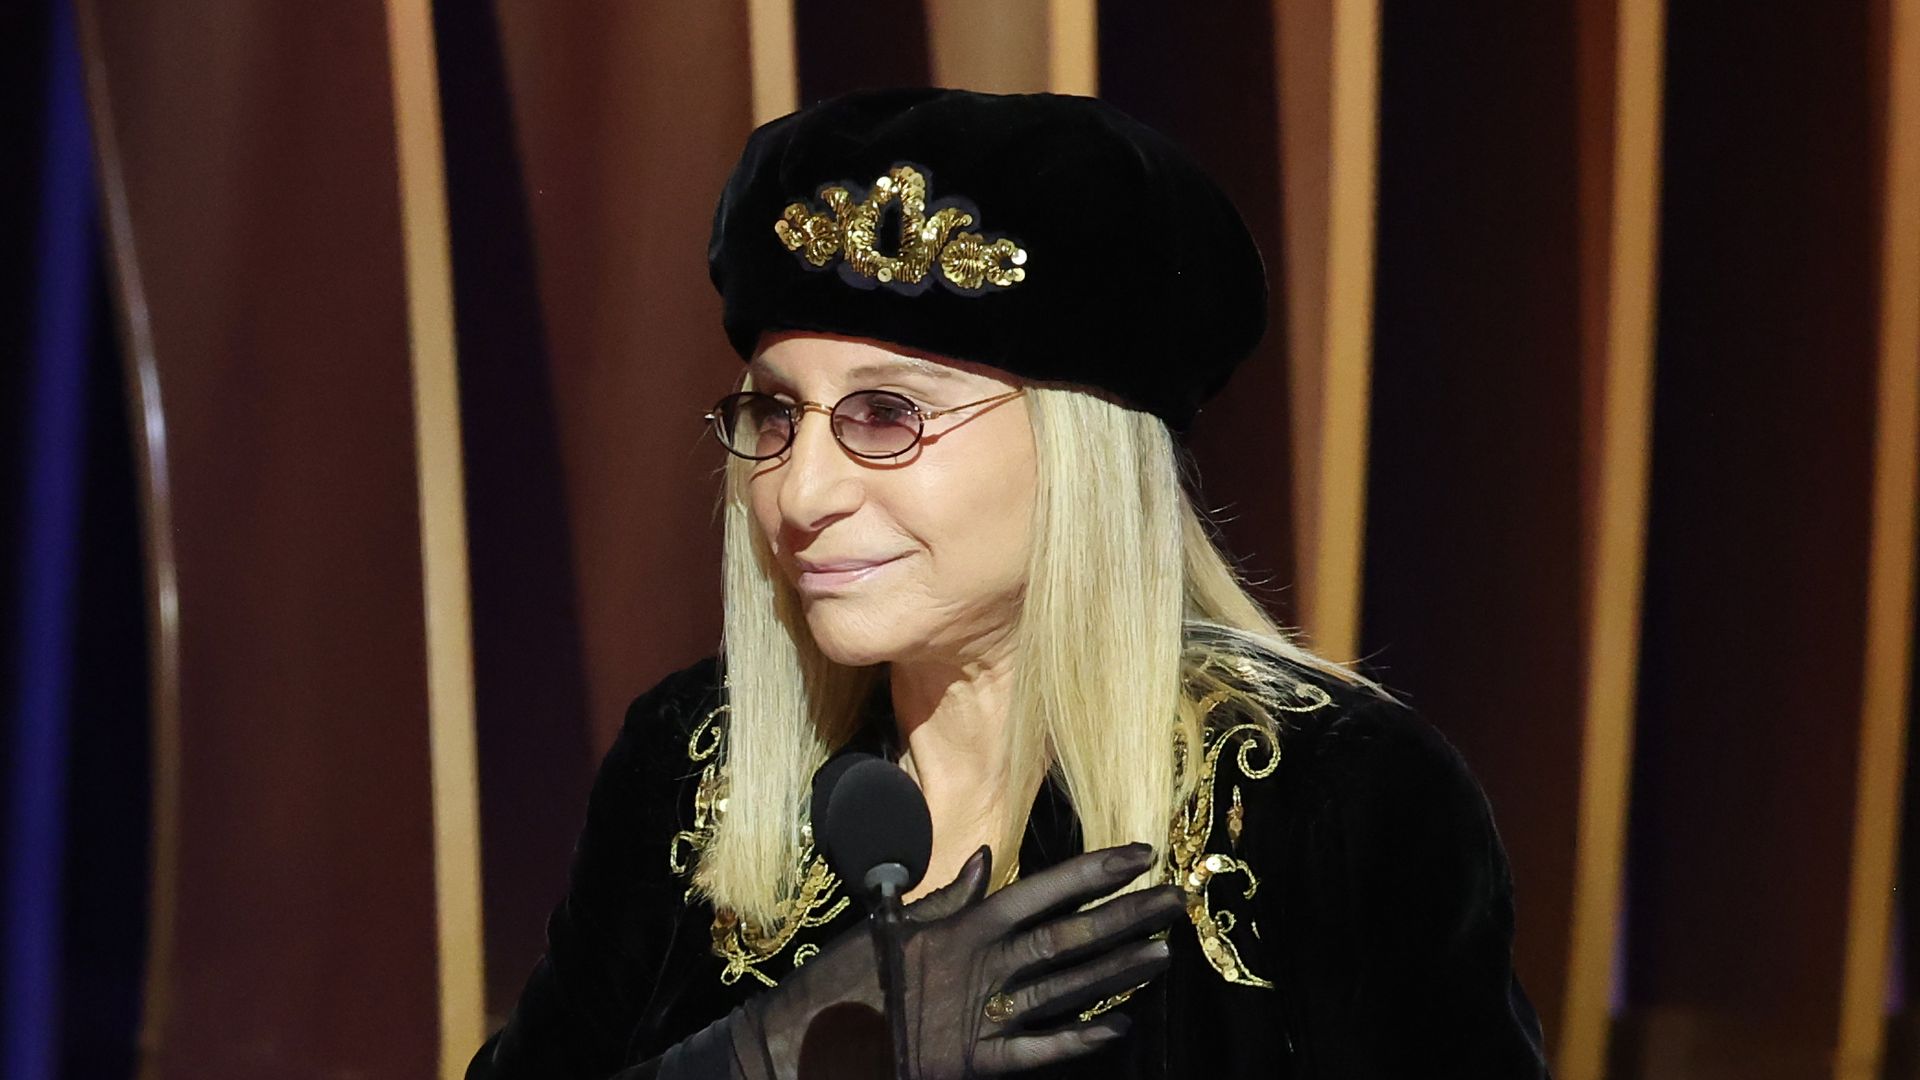 Barbra Streisand leaves star-studded audience in tears with rare public appearance at SAG Awards